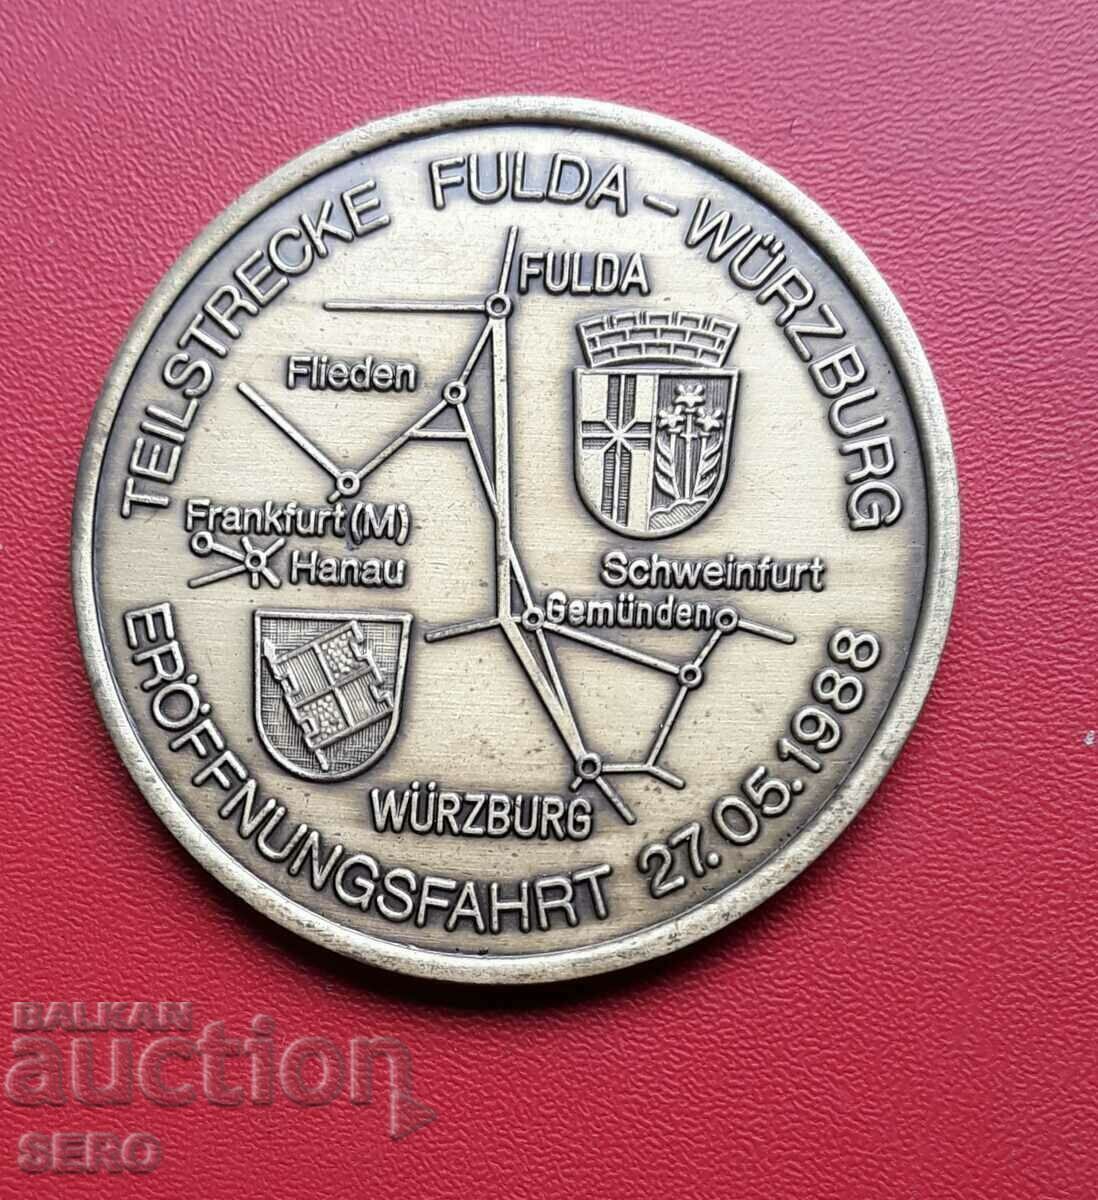 Germany-medal 1986-construction of the Hanover-Würzburg railway line